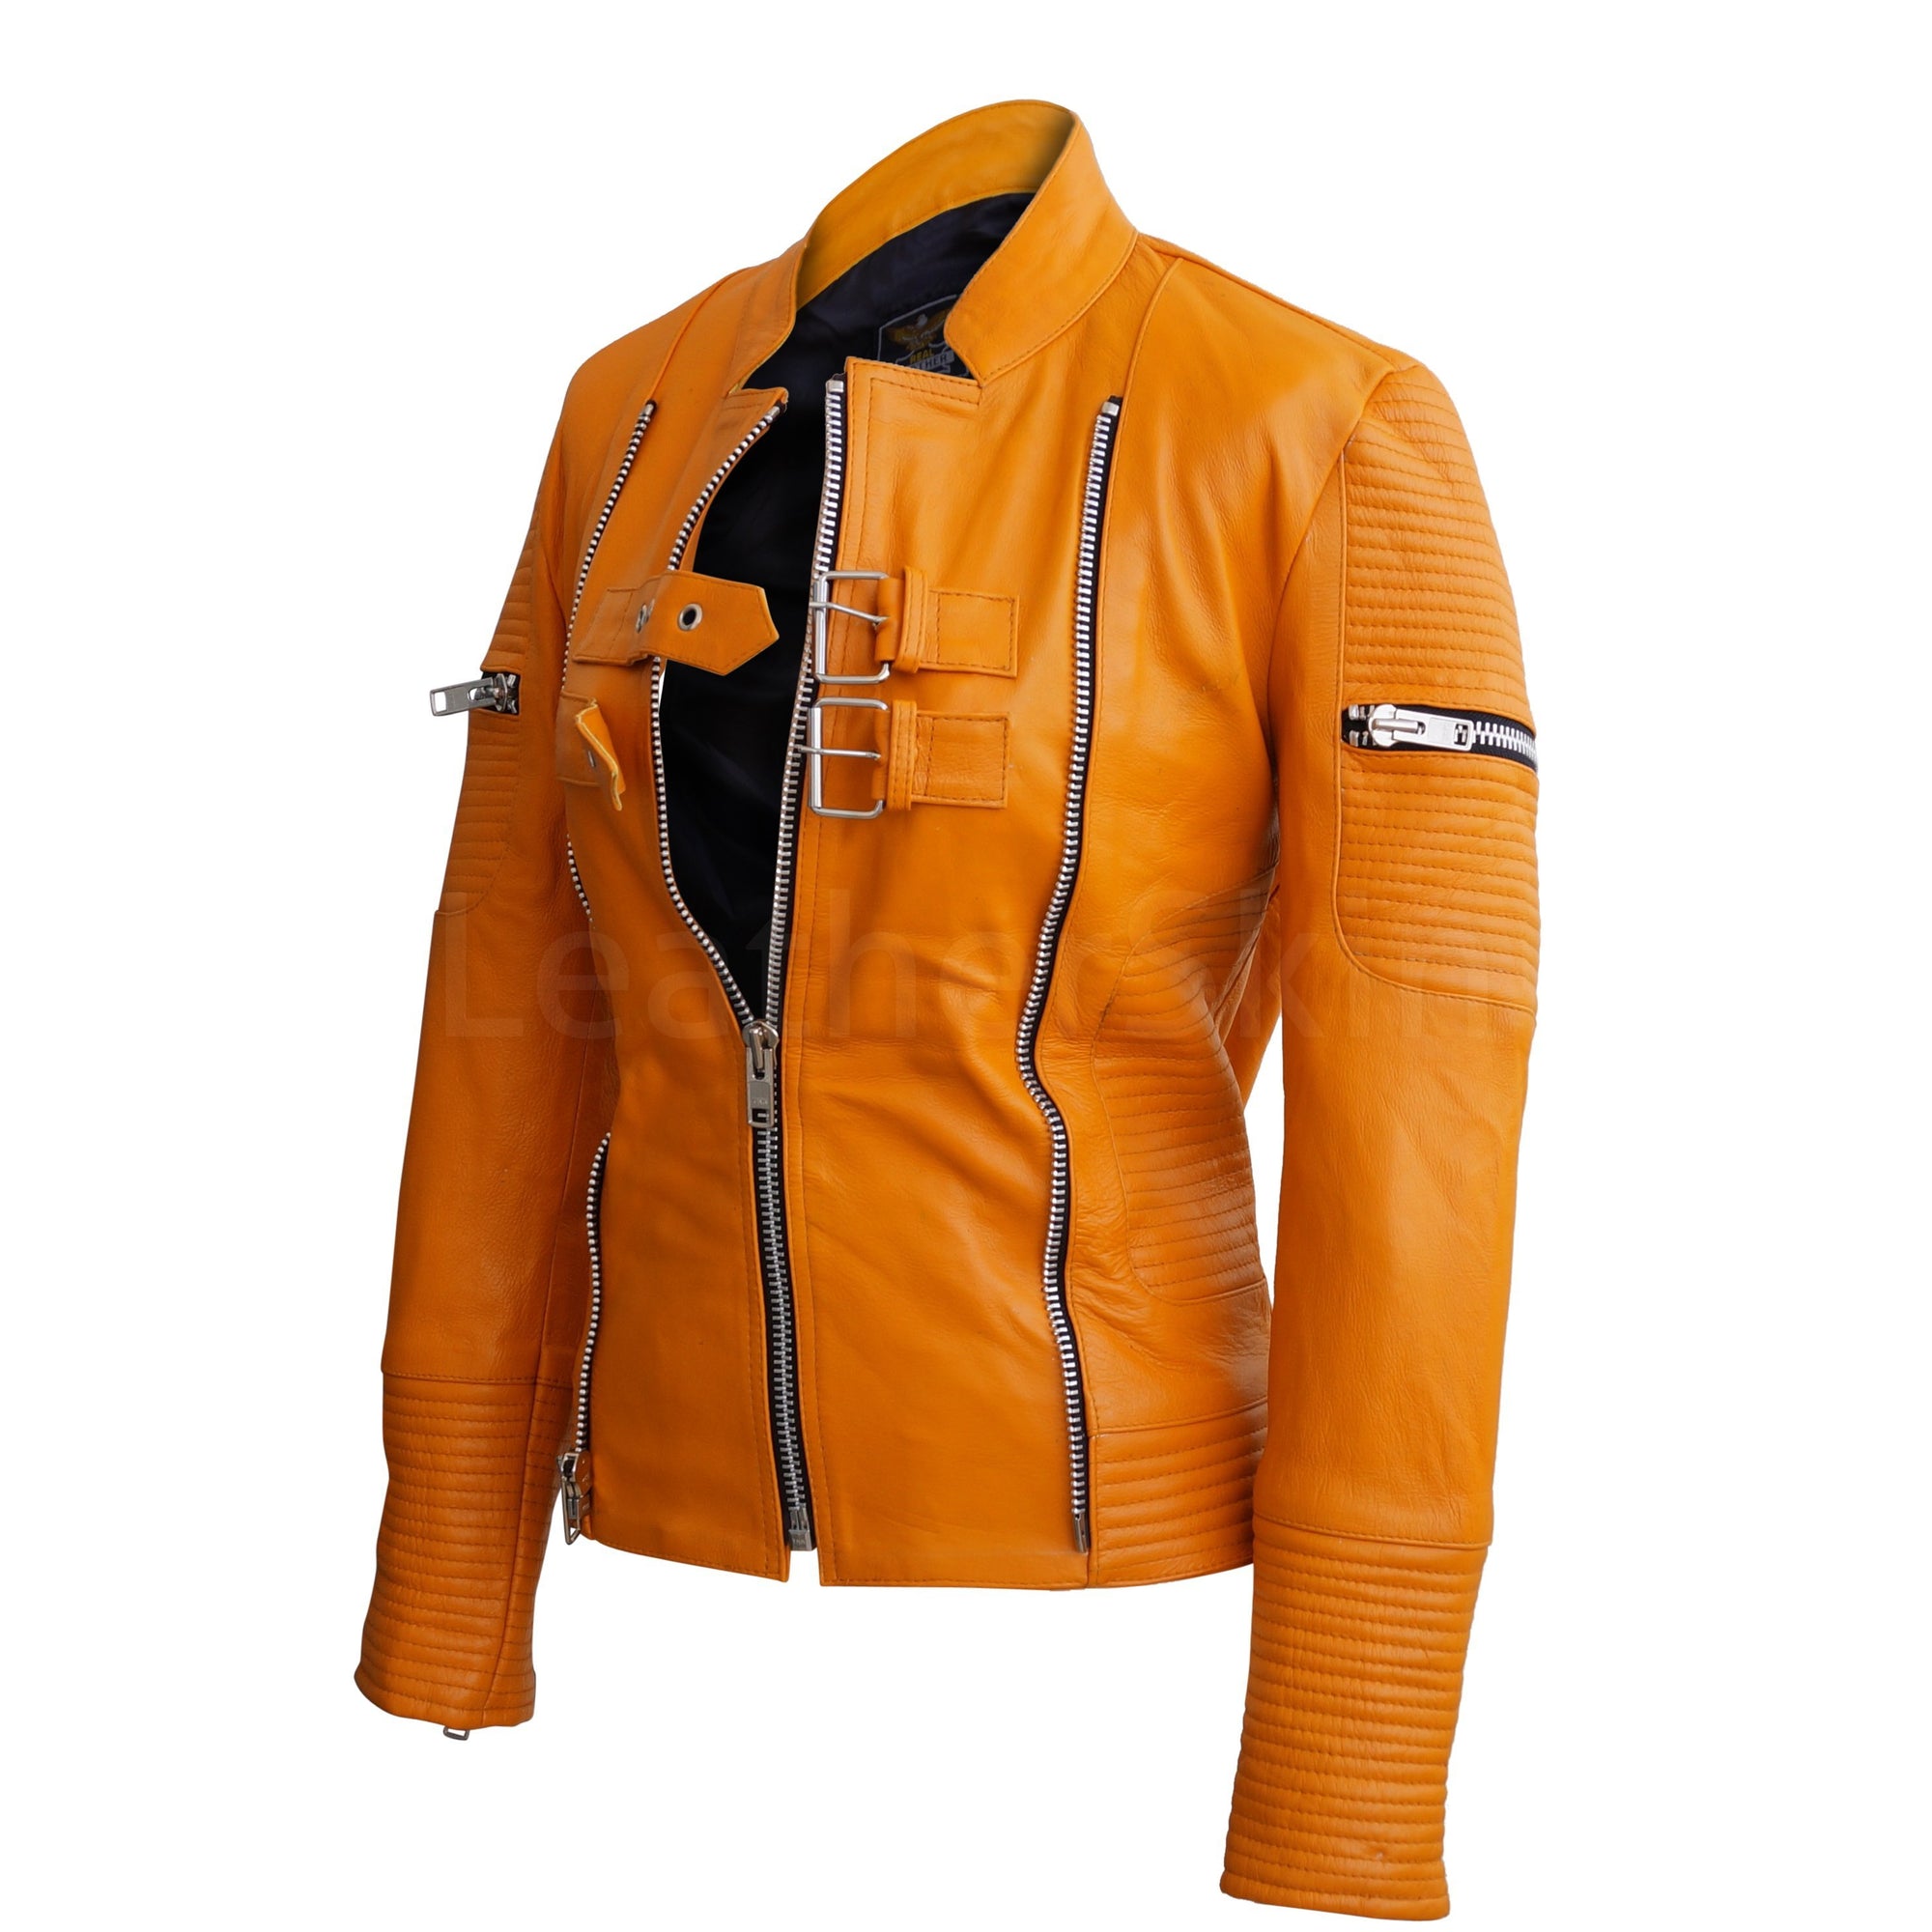 Womens Yellow Leather Jacket, Silver Metal Hardware